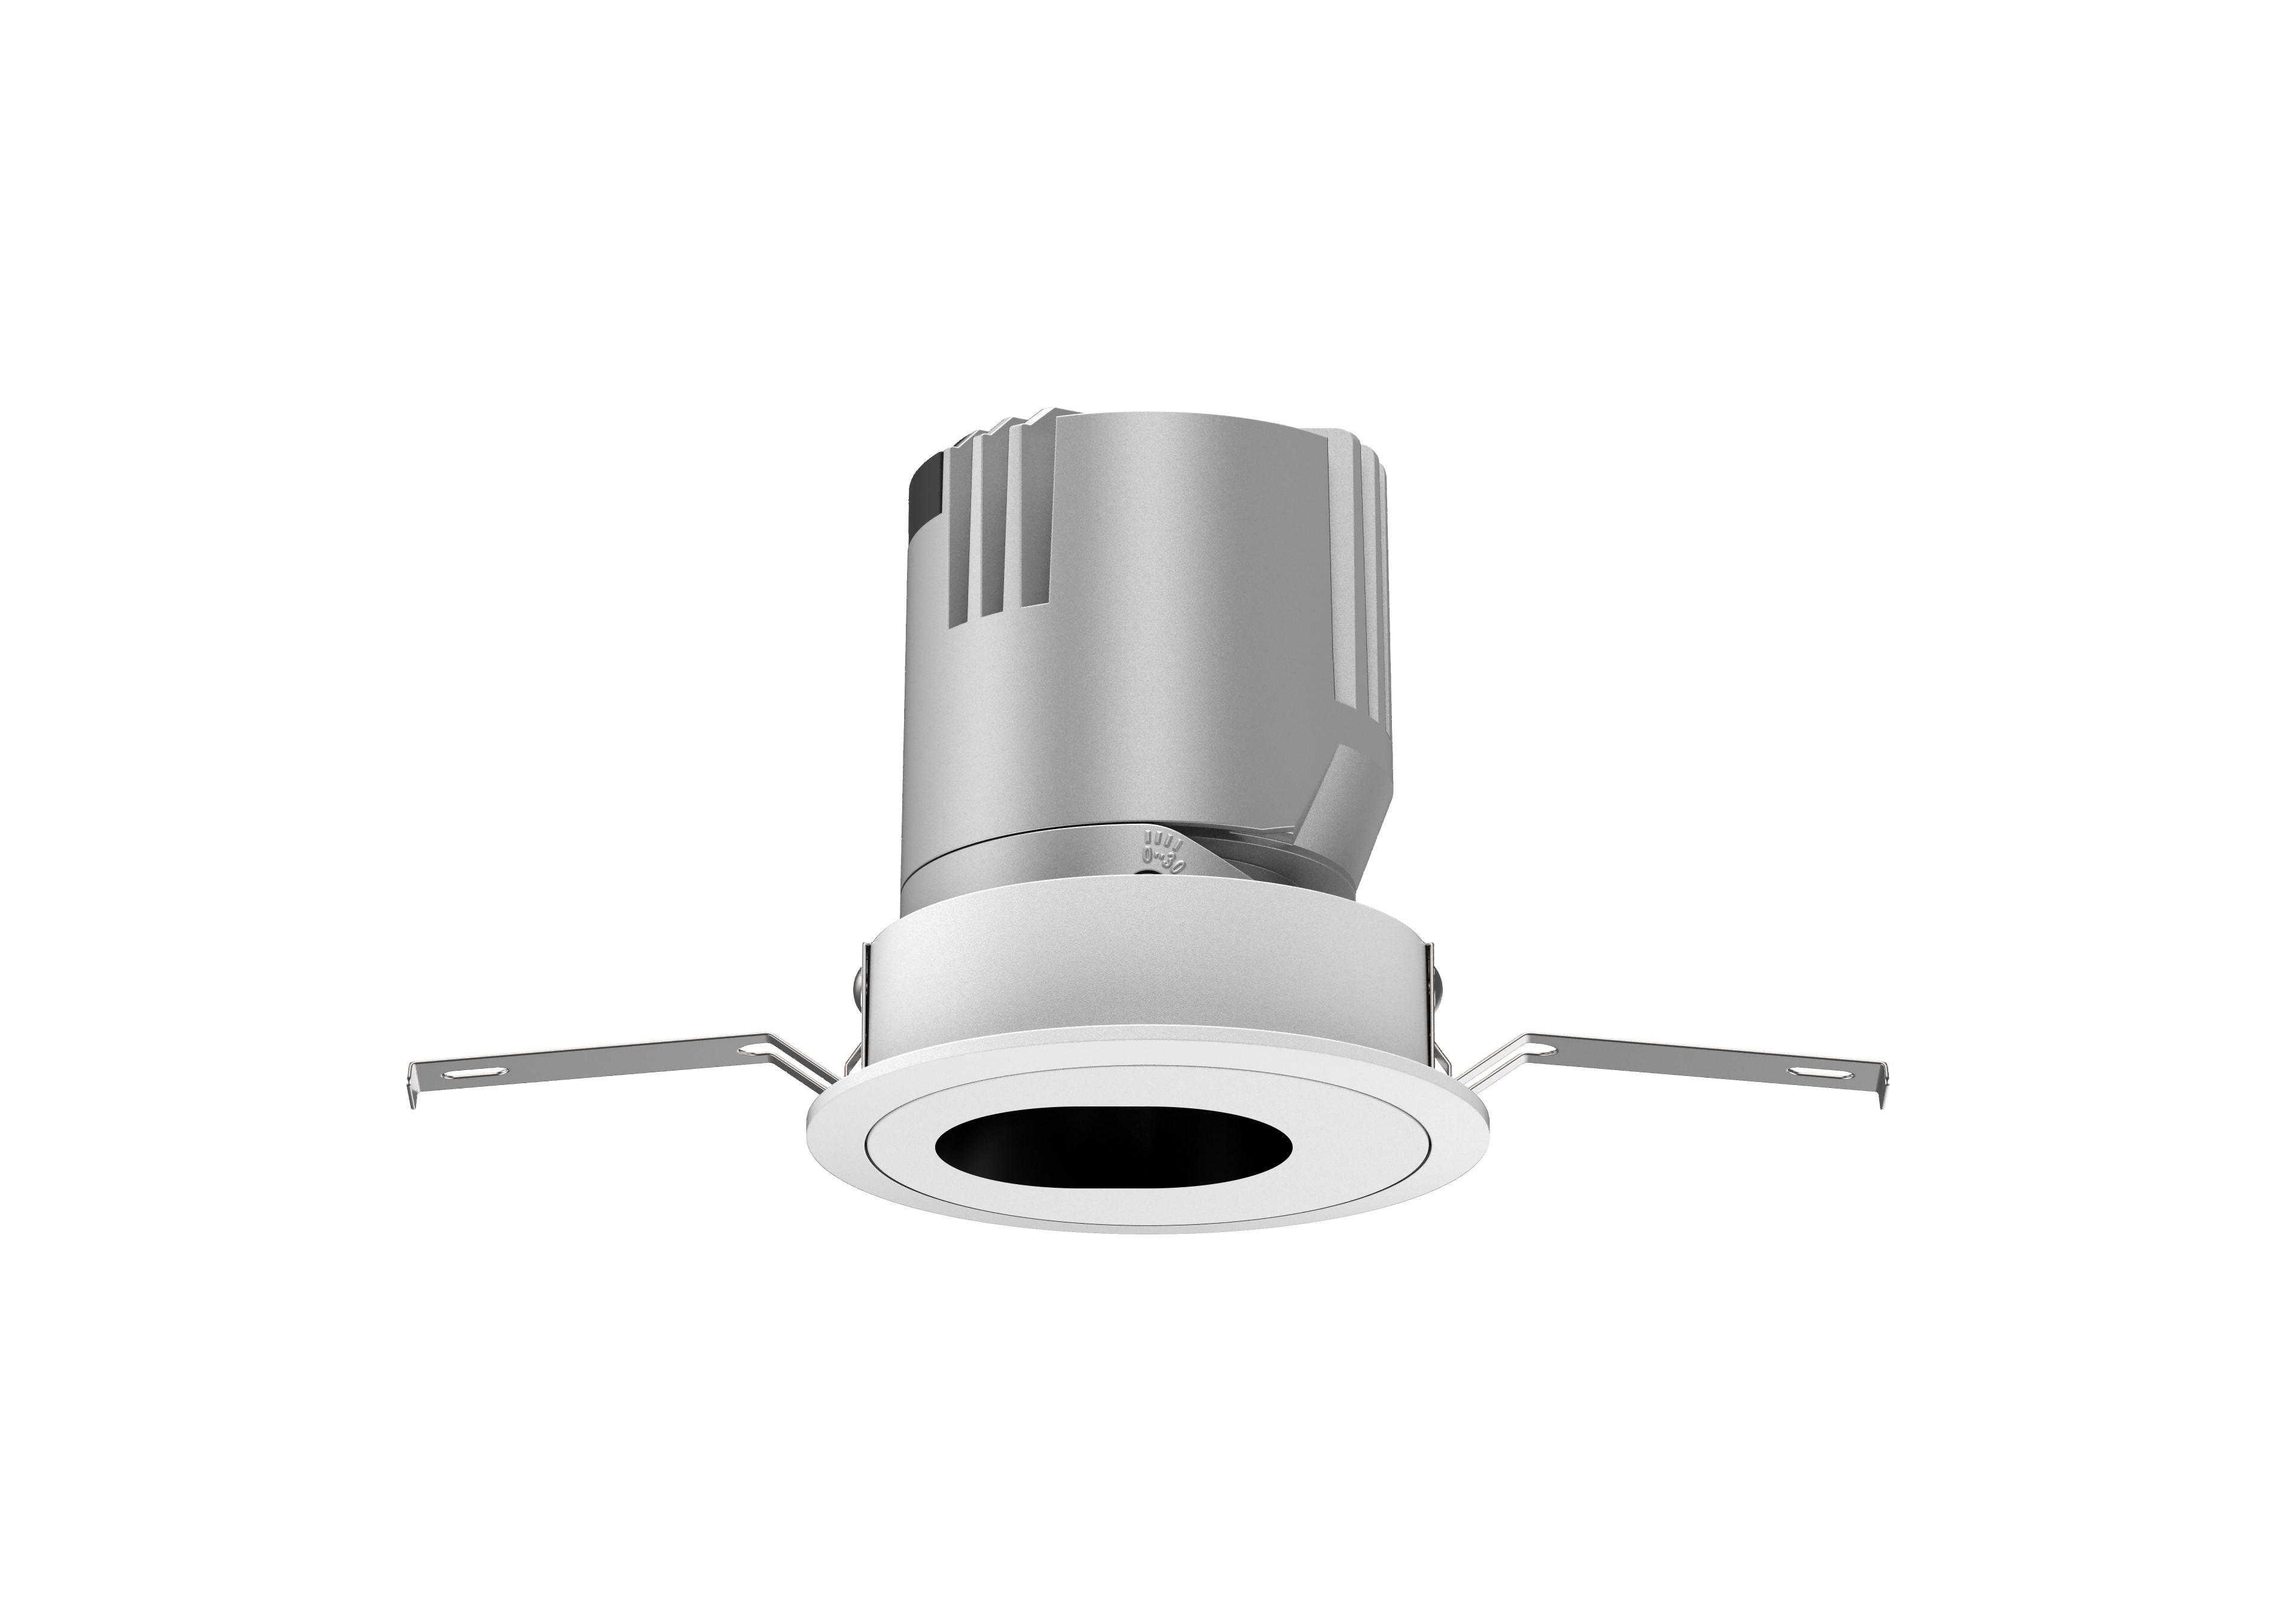 recessed round adjustable spot light for residential,villas,apartments,hotel